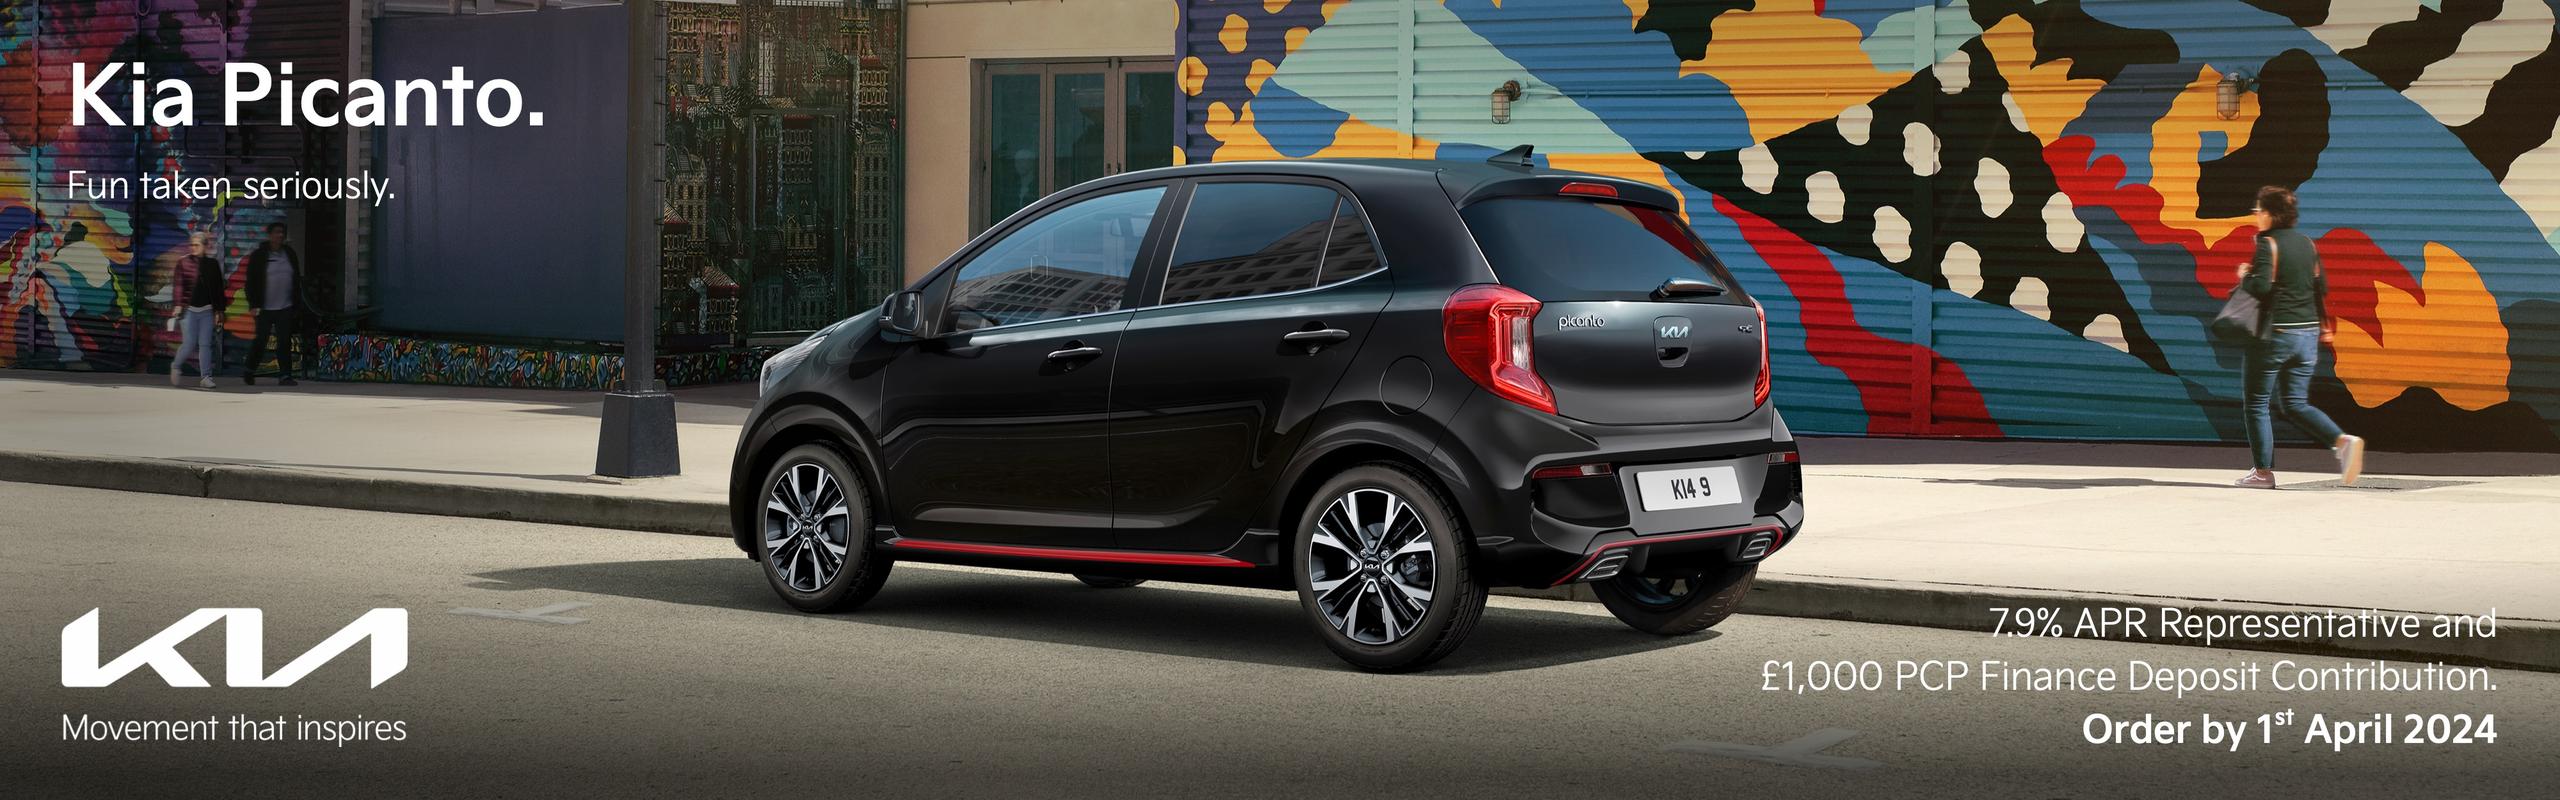 Kia Picanto - fun taken seriously. 7.9% APR representative and £1,000 PCP Finance Deposit Contribution. Order by 13th December 2023.